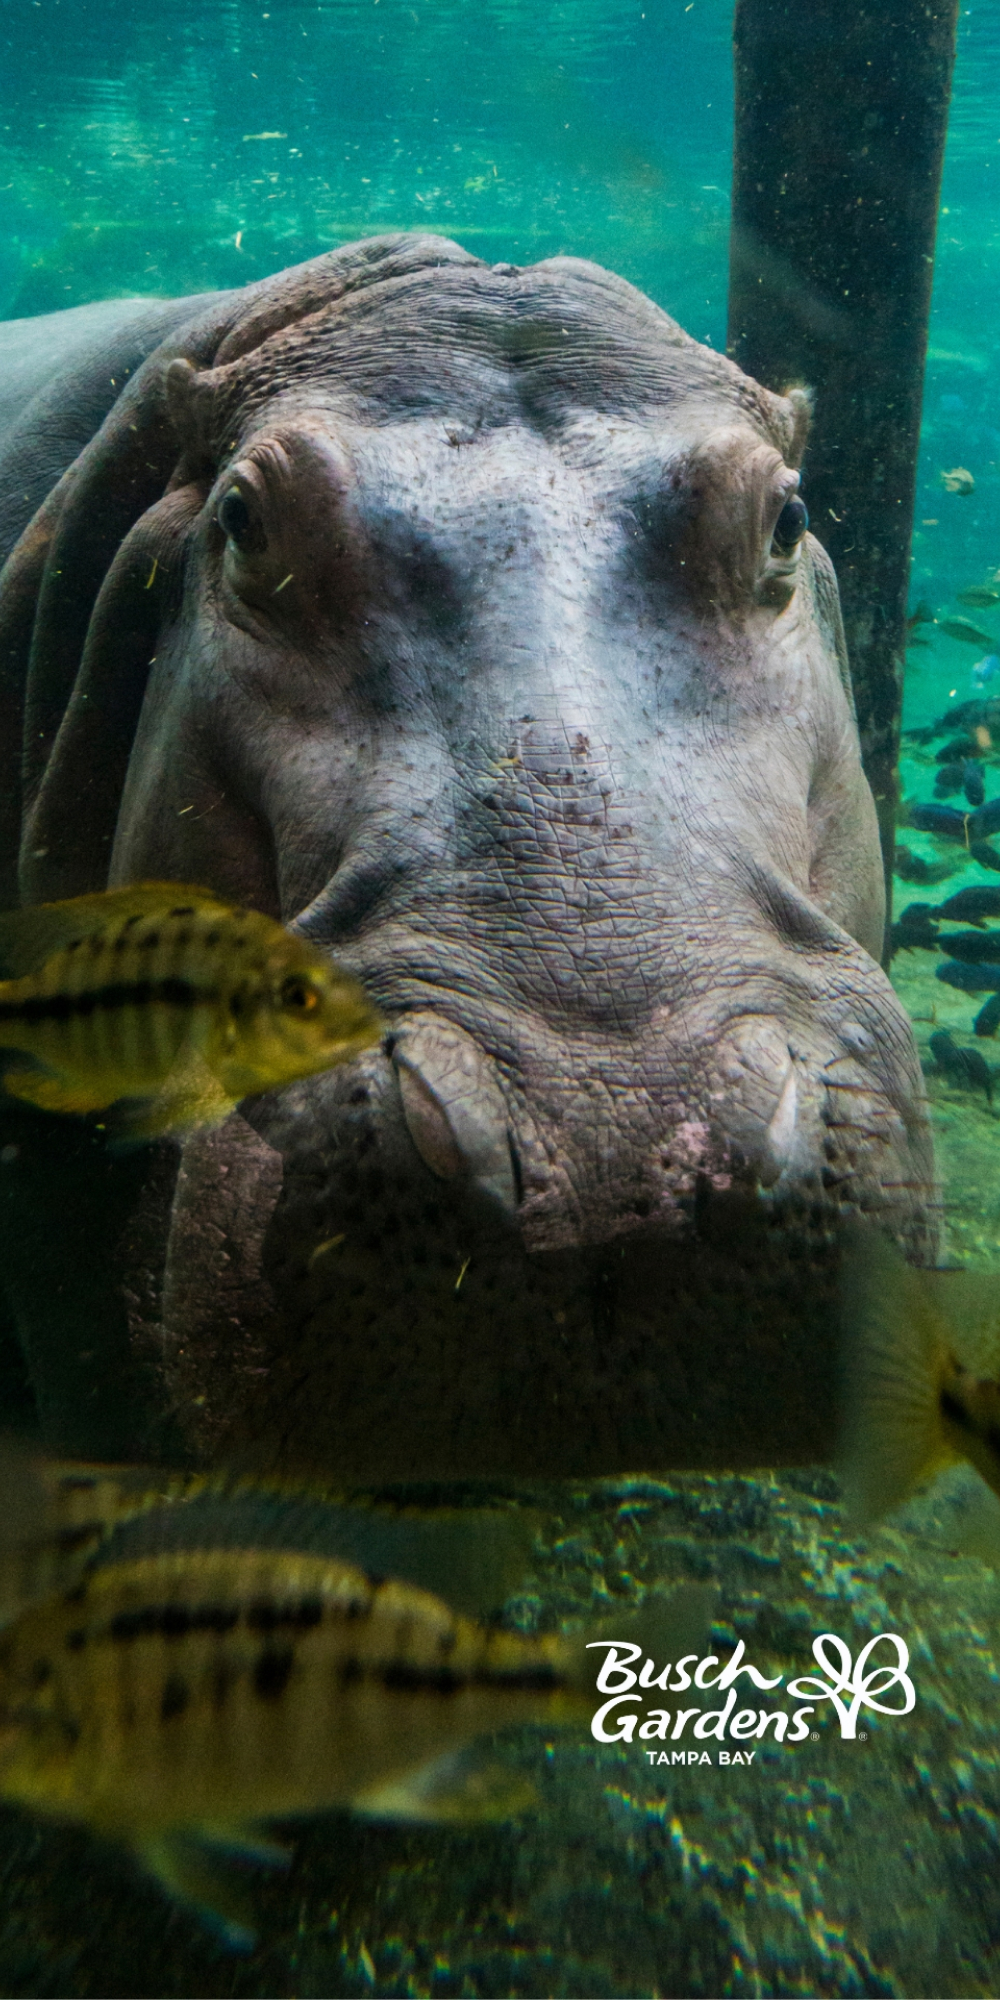 Busch Gardens Tampa Bay Celebrates National Zoo and Aquarium Month with phone wallpapers of your favorite animals.